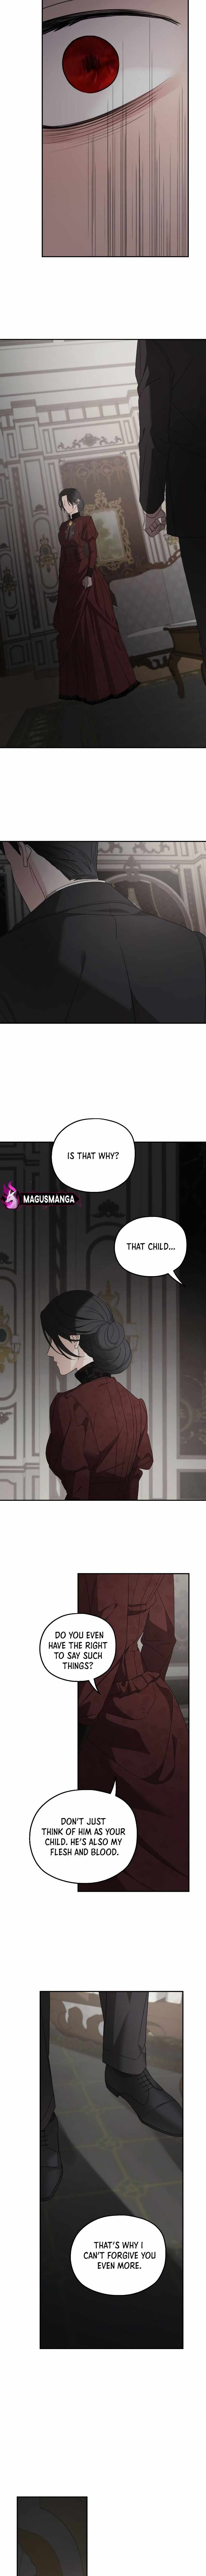 read My In-laws are Obsessed With Me Chapter 105 Manga Online Free at Mangabuddy, MangaNato,Manhwatop | MangaSo.com